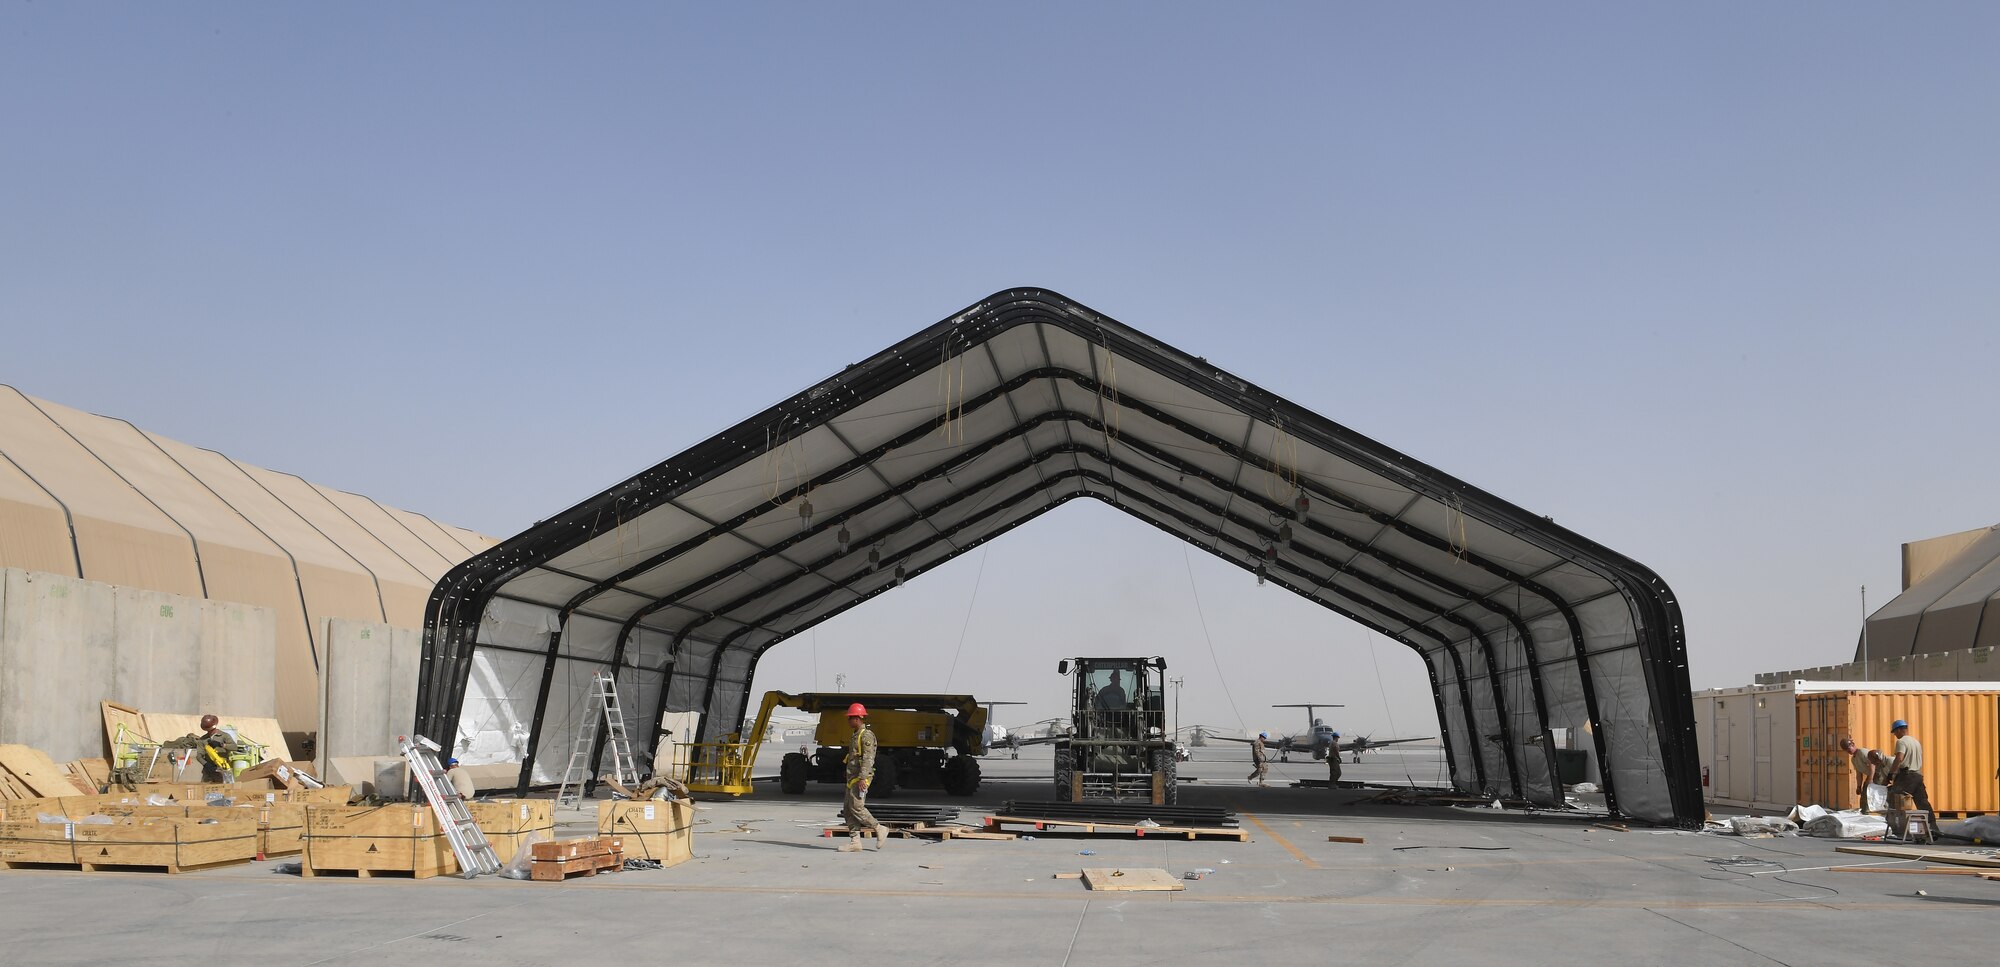 U.S. Air Force Airmen, assigned to the 577th Expeditionary Prime Base Engineer Emergency Force Group, build an aircraft hanger on Kandahar Airfield, Afghanistan, Dec. 27, 2017.